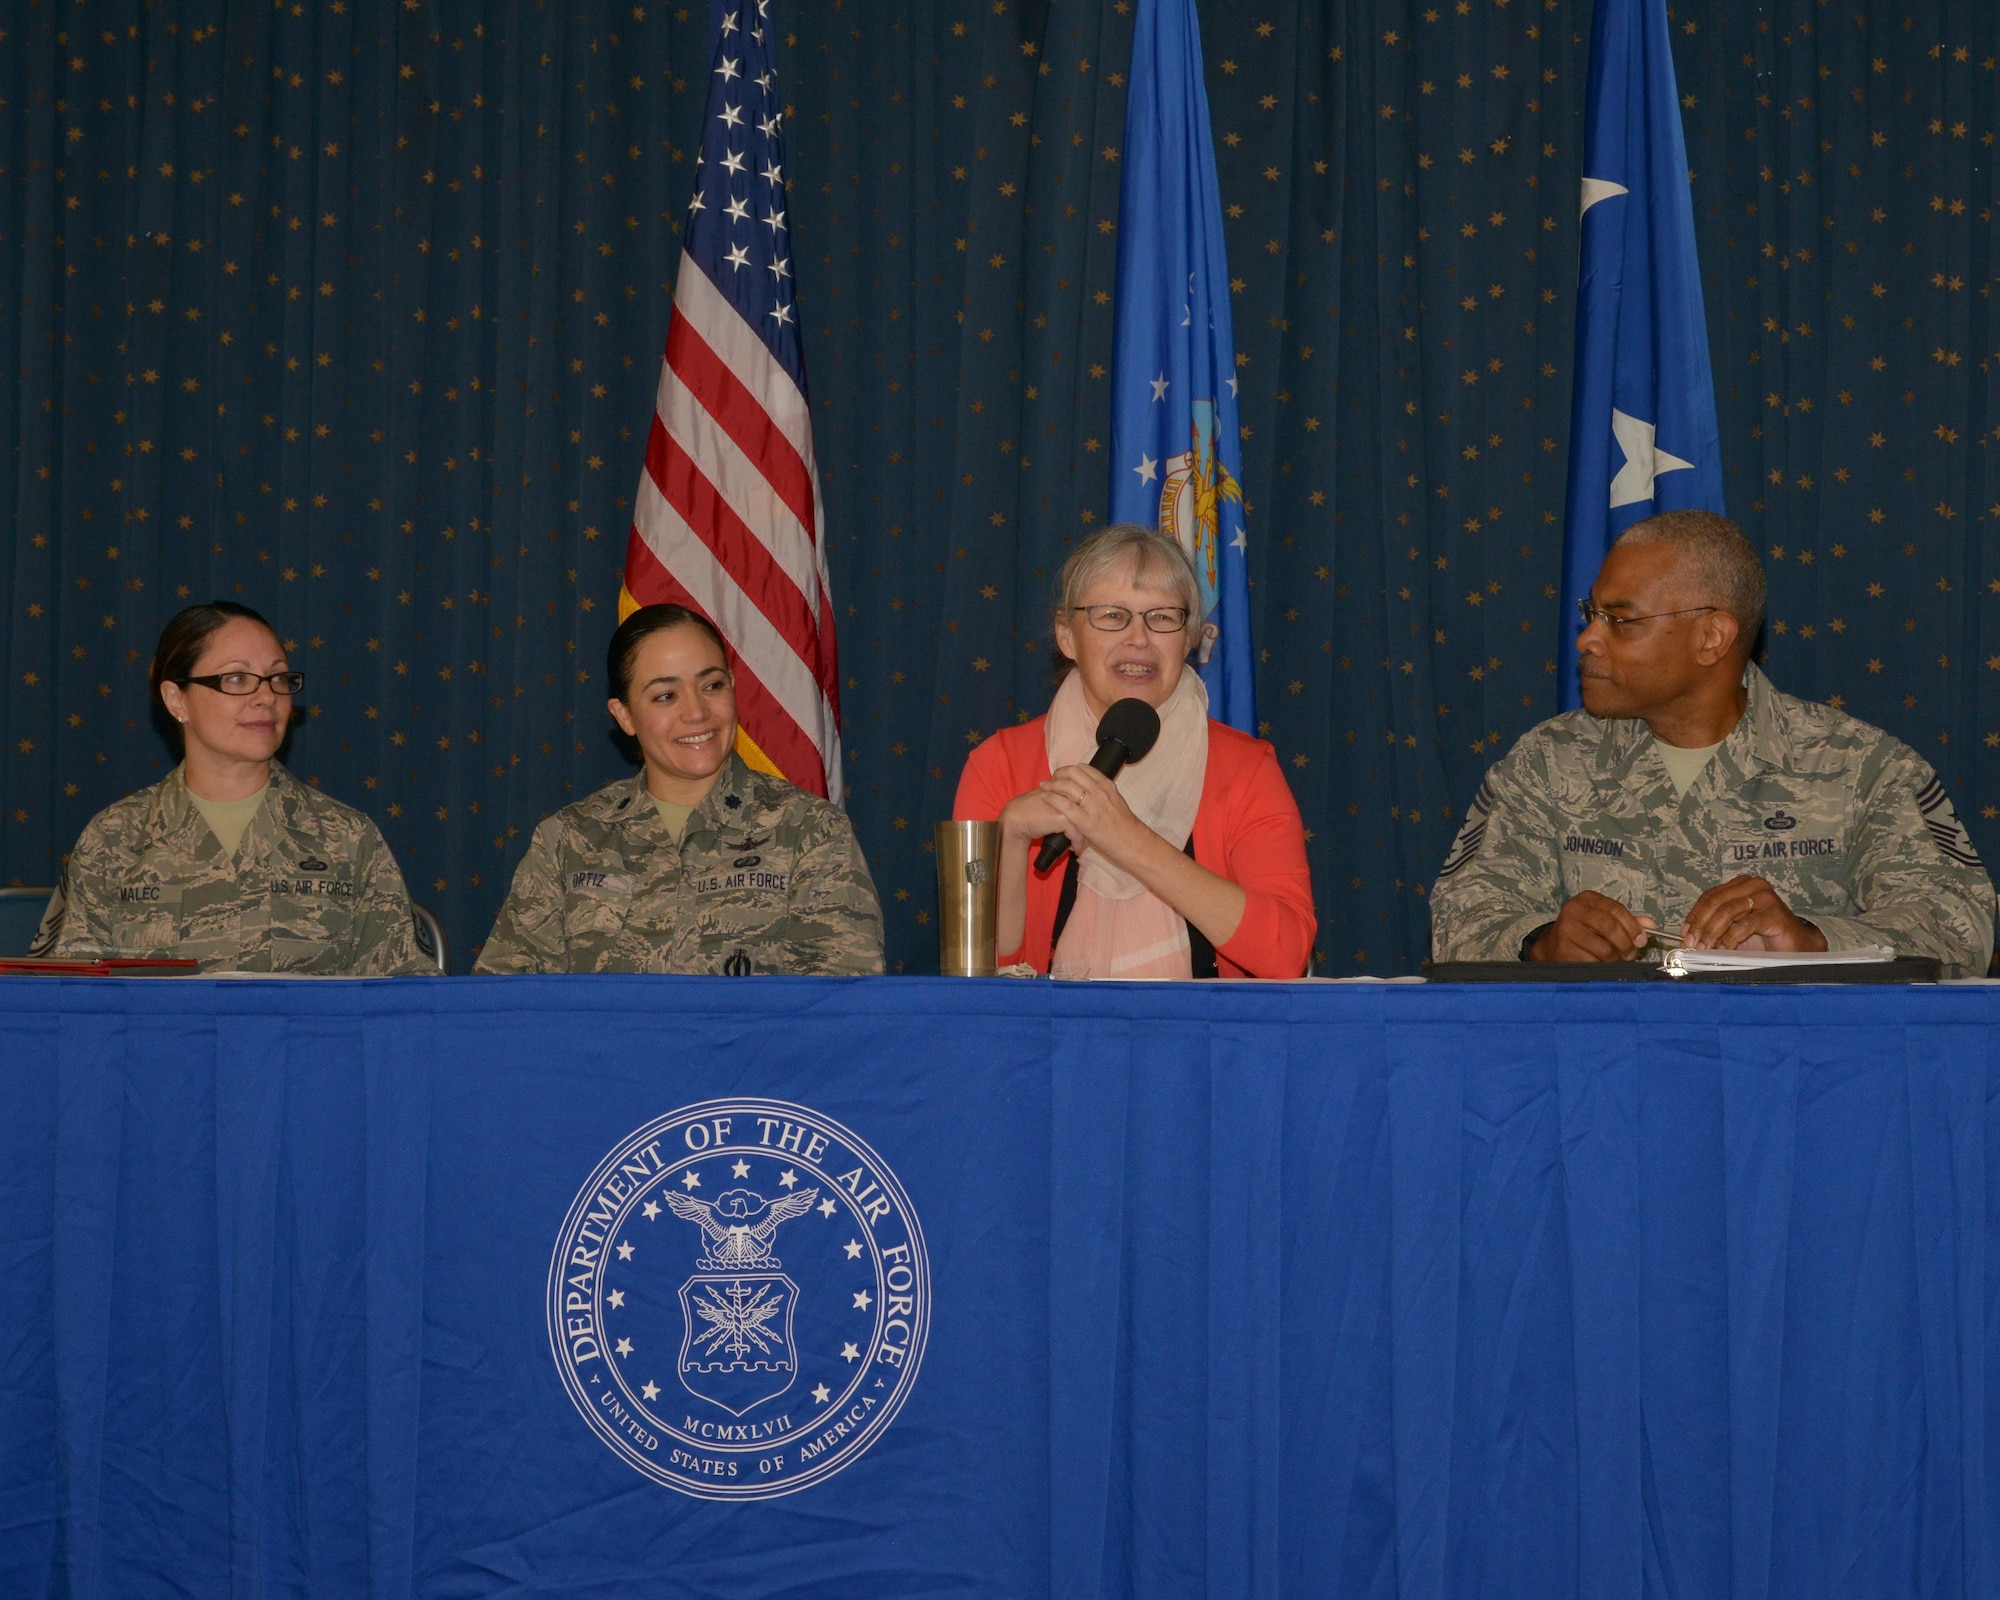 Stephanie O’Sullivan, Principal Deputy Director of National Intelligence, Lt. Col. Sylvette Ortiz, 20th Air Force Safety and Nuclear Surety director, Chief Master Sgt. Jack Johnson, command chief/command senior enlisted leader NATO, Allied Command Transformation, and Chief Master Sgt. Trisha Malec, 811th Force Support Squadron superintendent, answer questions during the diversity panel at the second 20th AF Women’s Leadership Symposium at Kirtland Air Force Base, N.M., Sept. 27, 2016. Both male and female Airmen who attended discussed several topics with military senior leaders such as mentorship, gender inclusion and persevering through challenges. The three-day event supports 20th AF’s goal to coach, train and mentor nuclear professionals and leaders, while developing a nuclear command environment that fosters understanding, respect and the support necessary for people to thrive. (U.S. Air Force photo by Jamie Burnett)